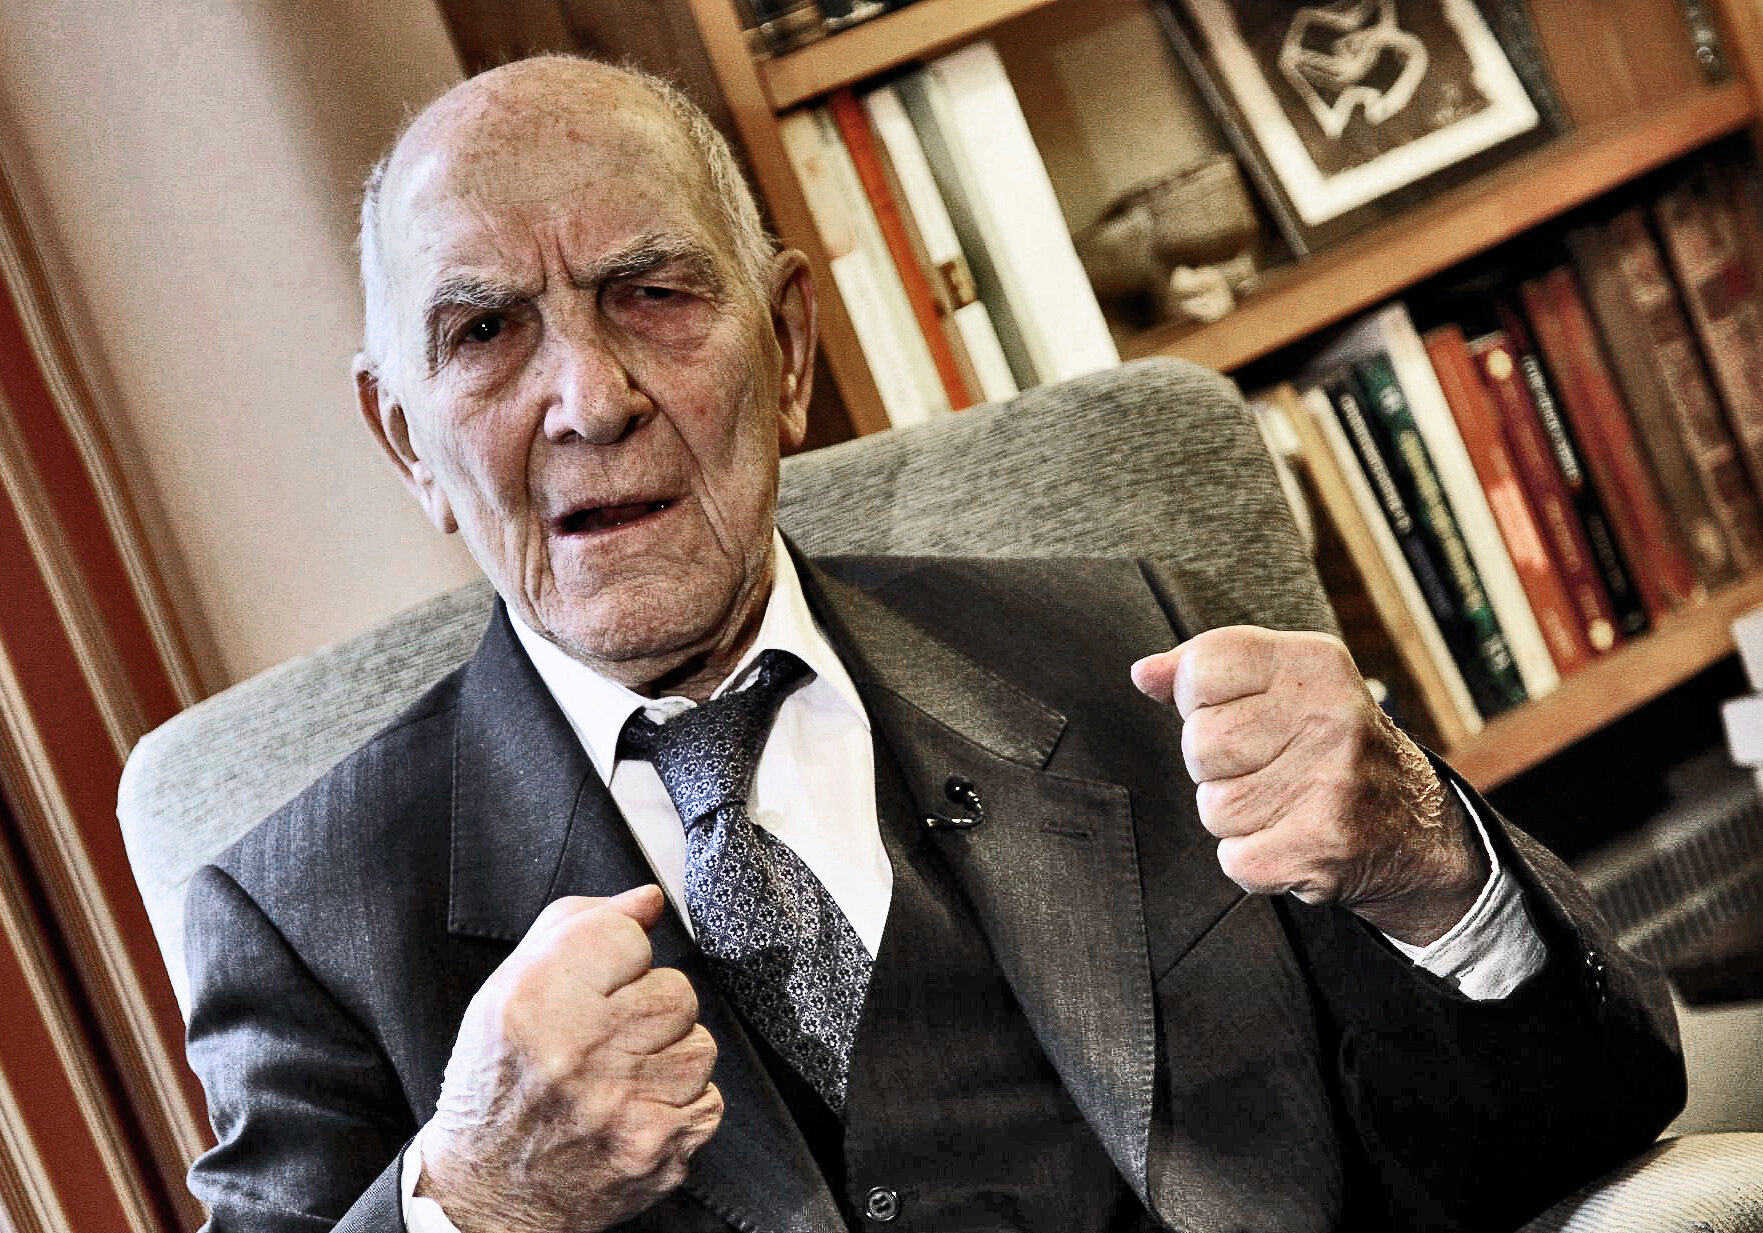 Stephane Hessel, a former French Resistance spy, Nazi concentration camp survivor and postwar diplomat is seen during an interview with The Associated Press in Paris, France, Thursday, Janv. 6, 2011. Hessel is making a splash with a best-selling book 30-page book "Indignez-Vous!" whose title translates as "Be Indignant" or "Get Angry" that urges readers to buck up and fight the world's big problems. (AP Photo/ Francois Mori)